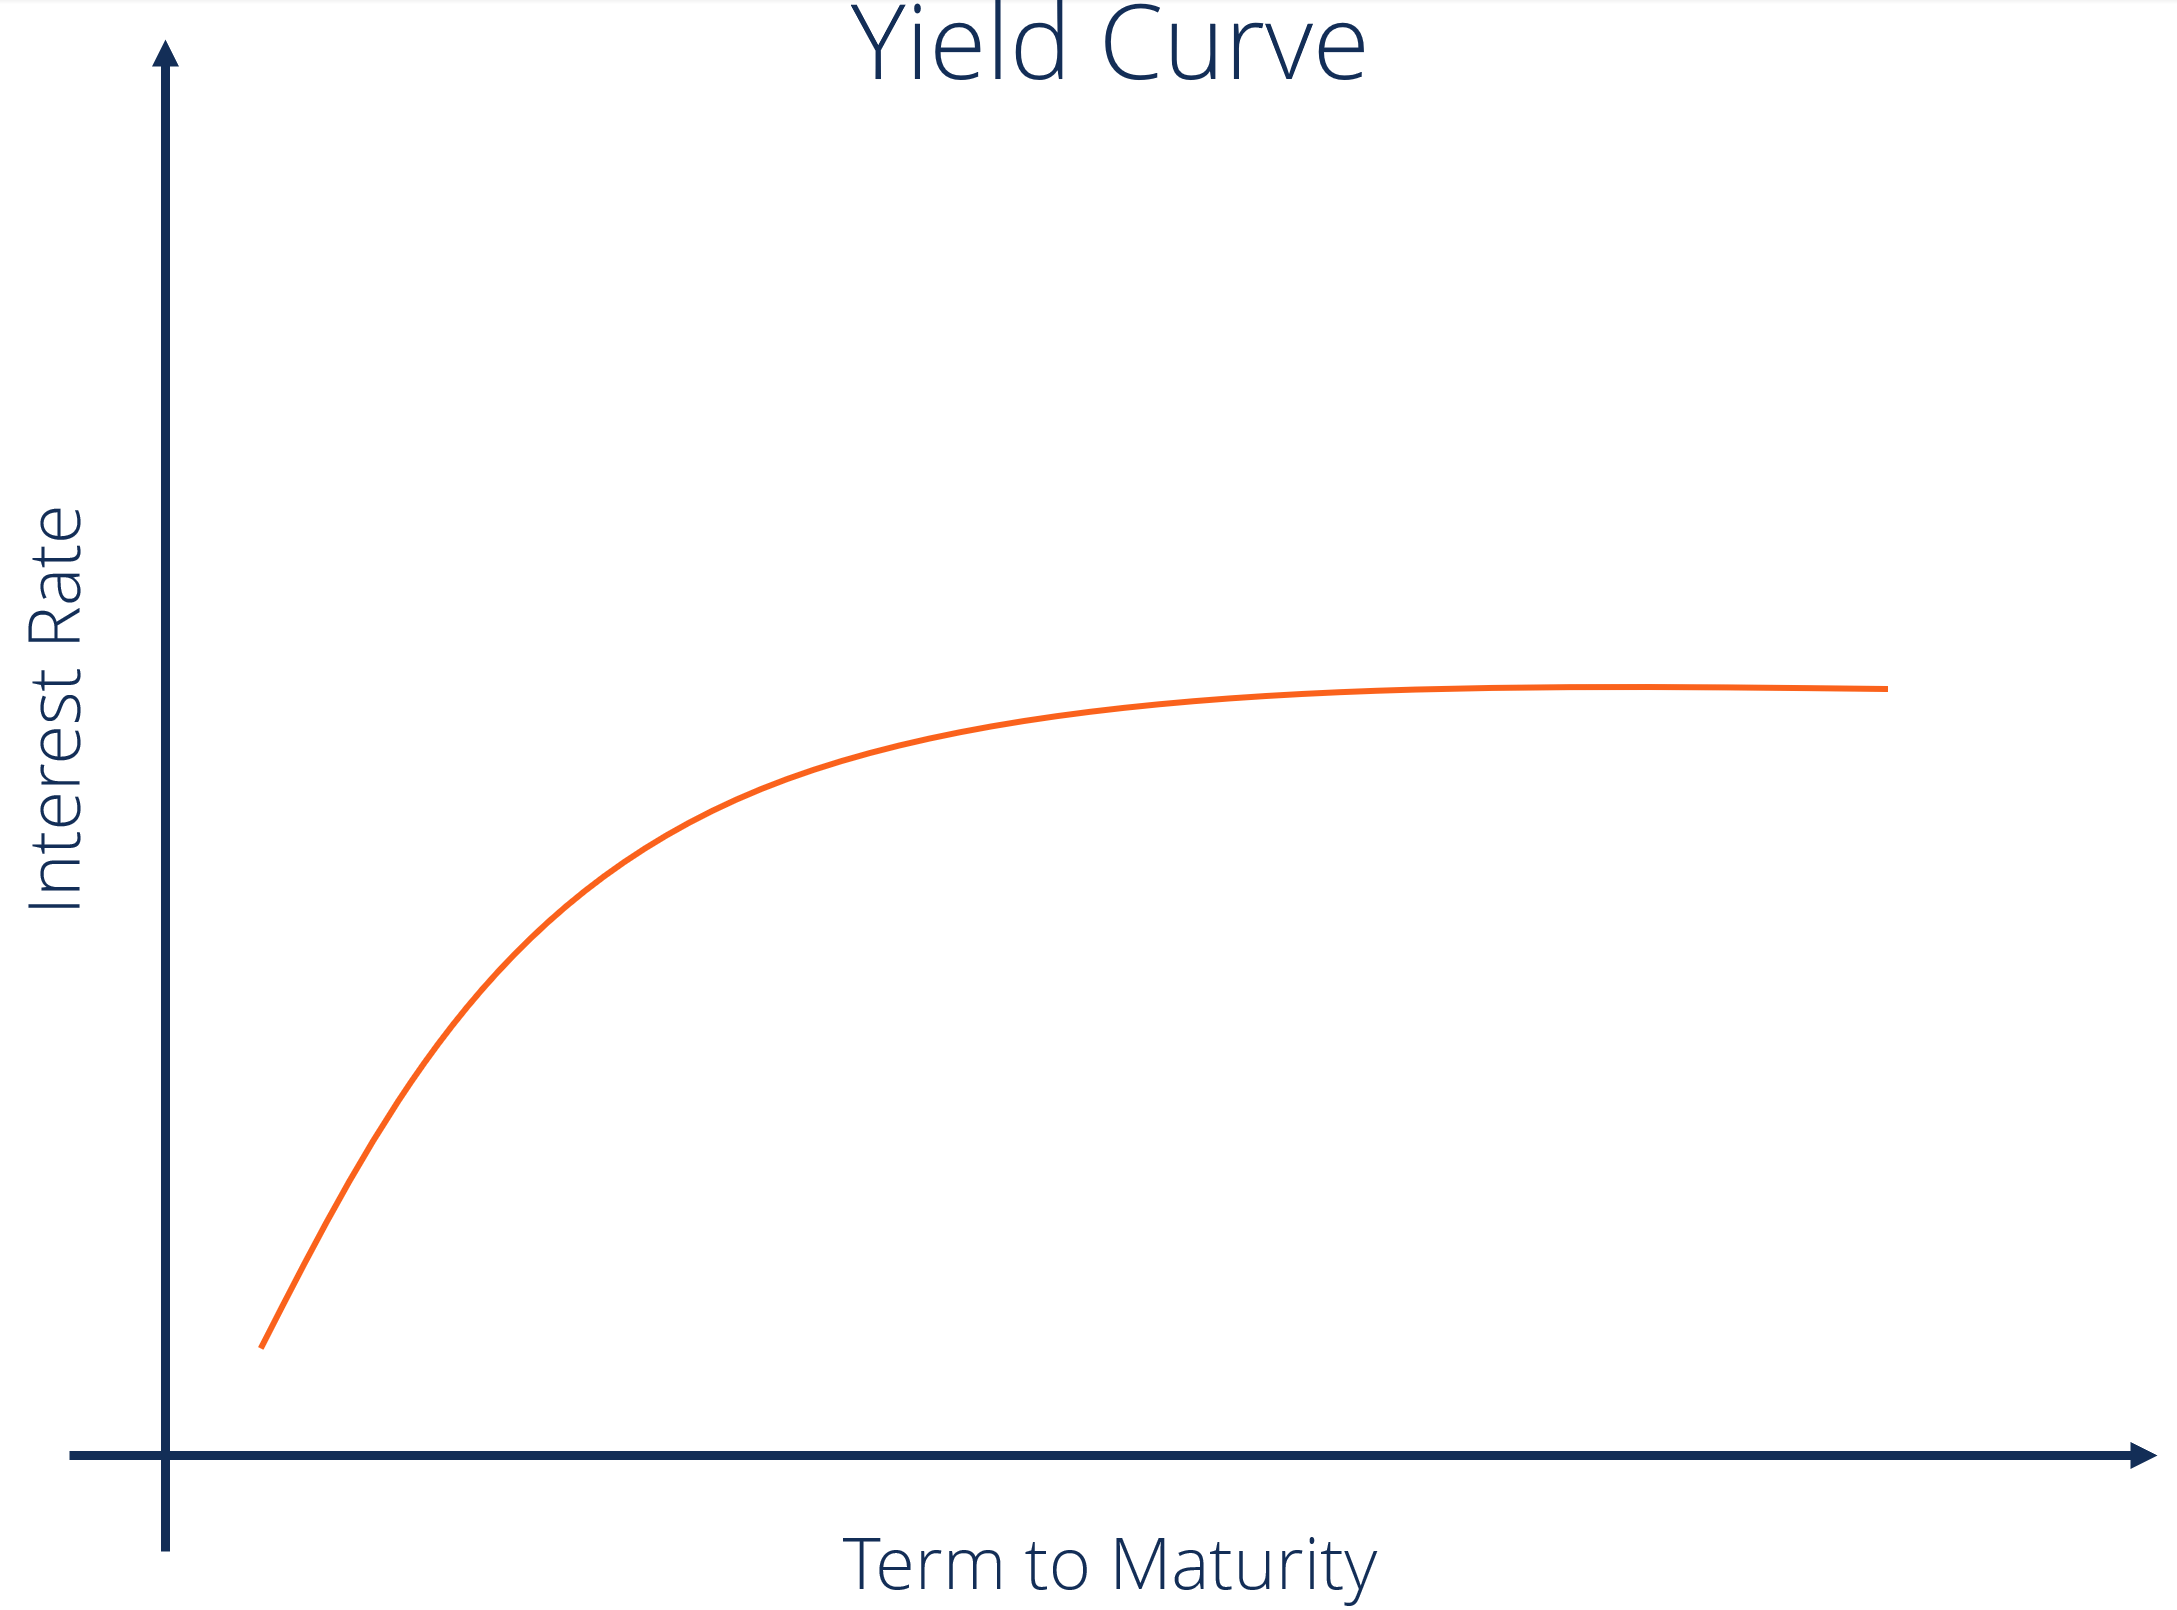 Rolling Down the Yield Curve - Definition, Benefits